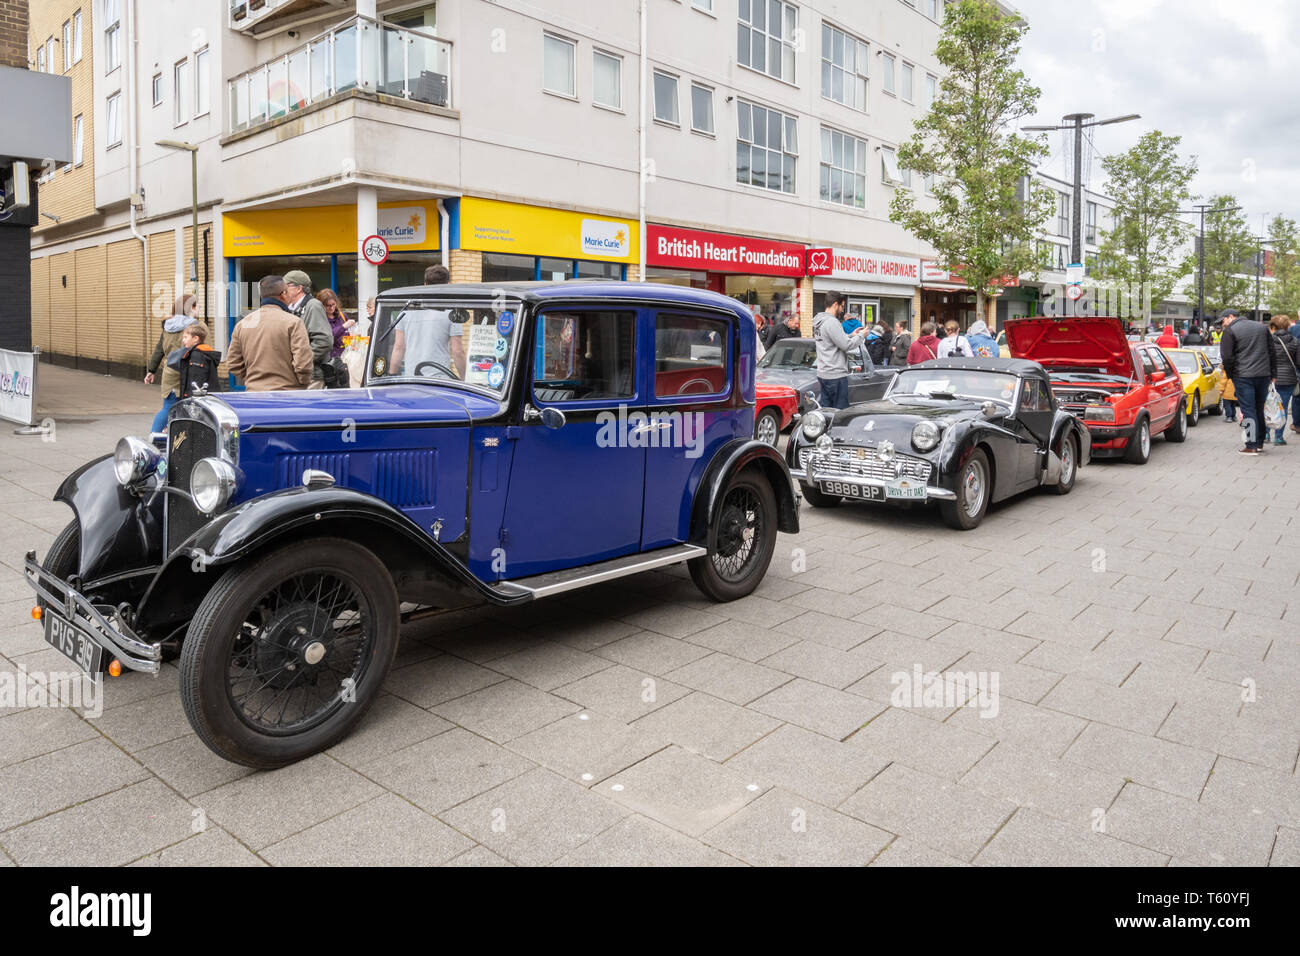 Farnborough Car Show, April 2019, classic motor vehicles on display in the town centre, Hampshire, UK Stock Photo